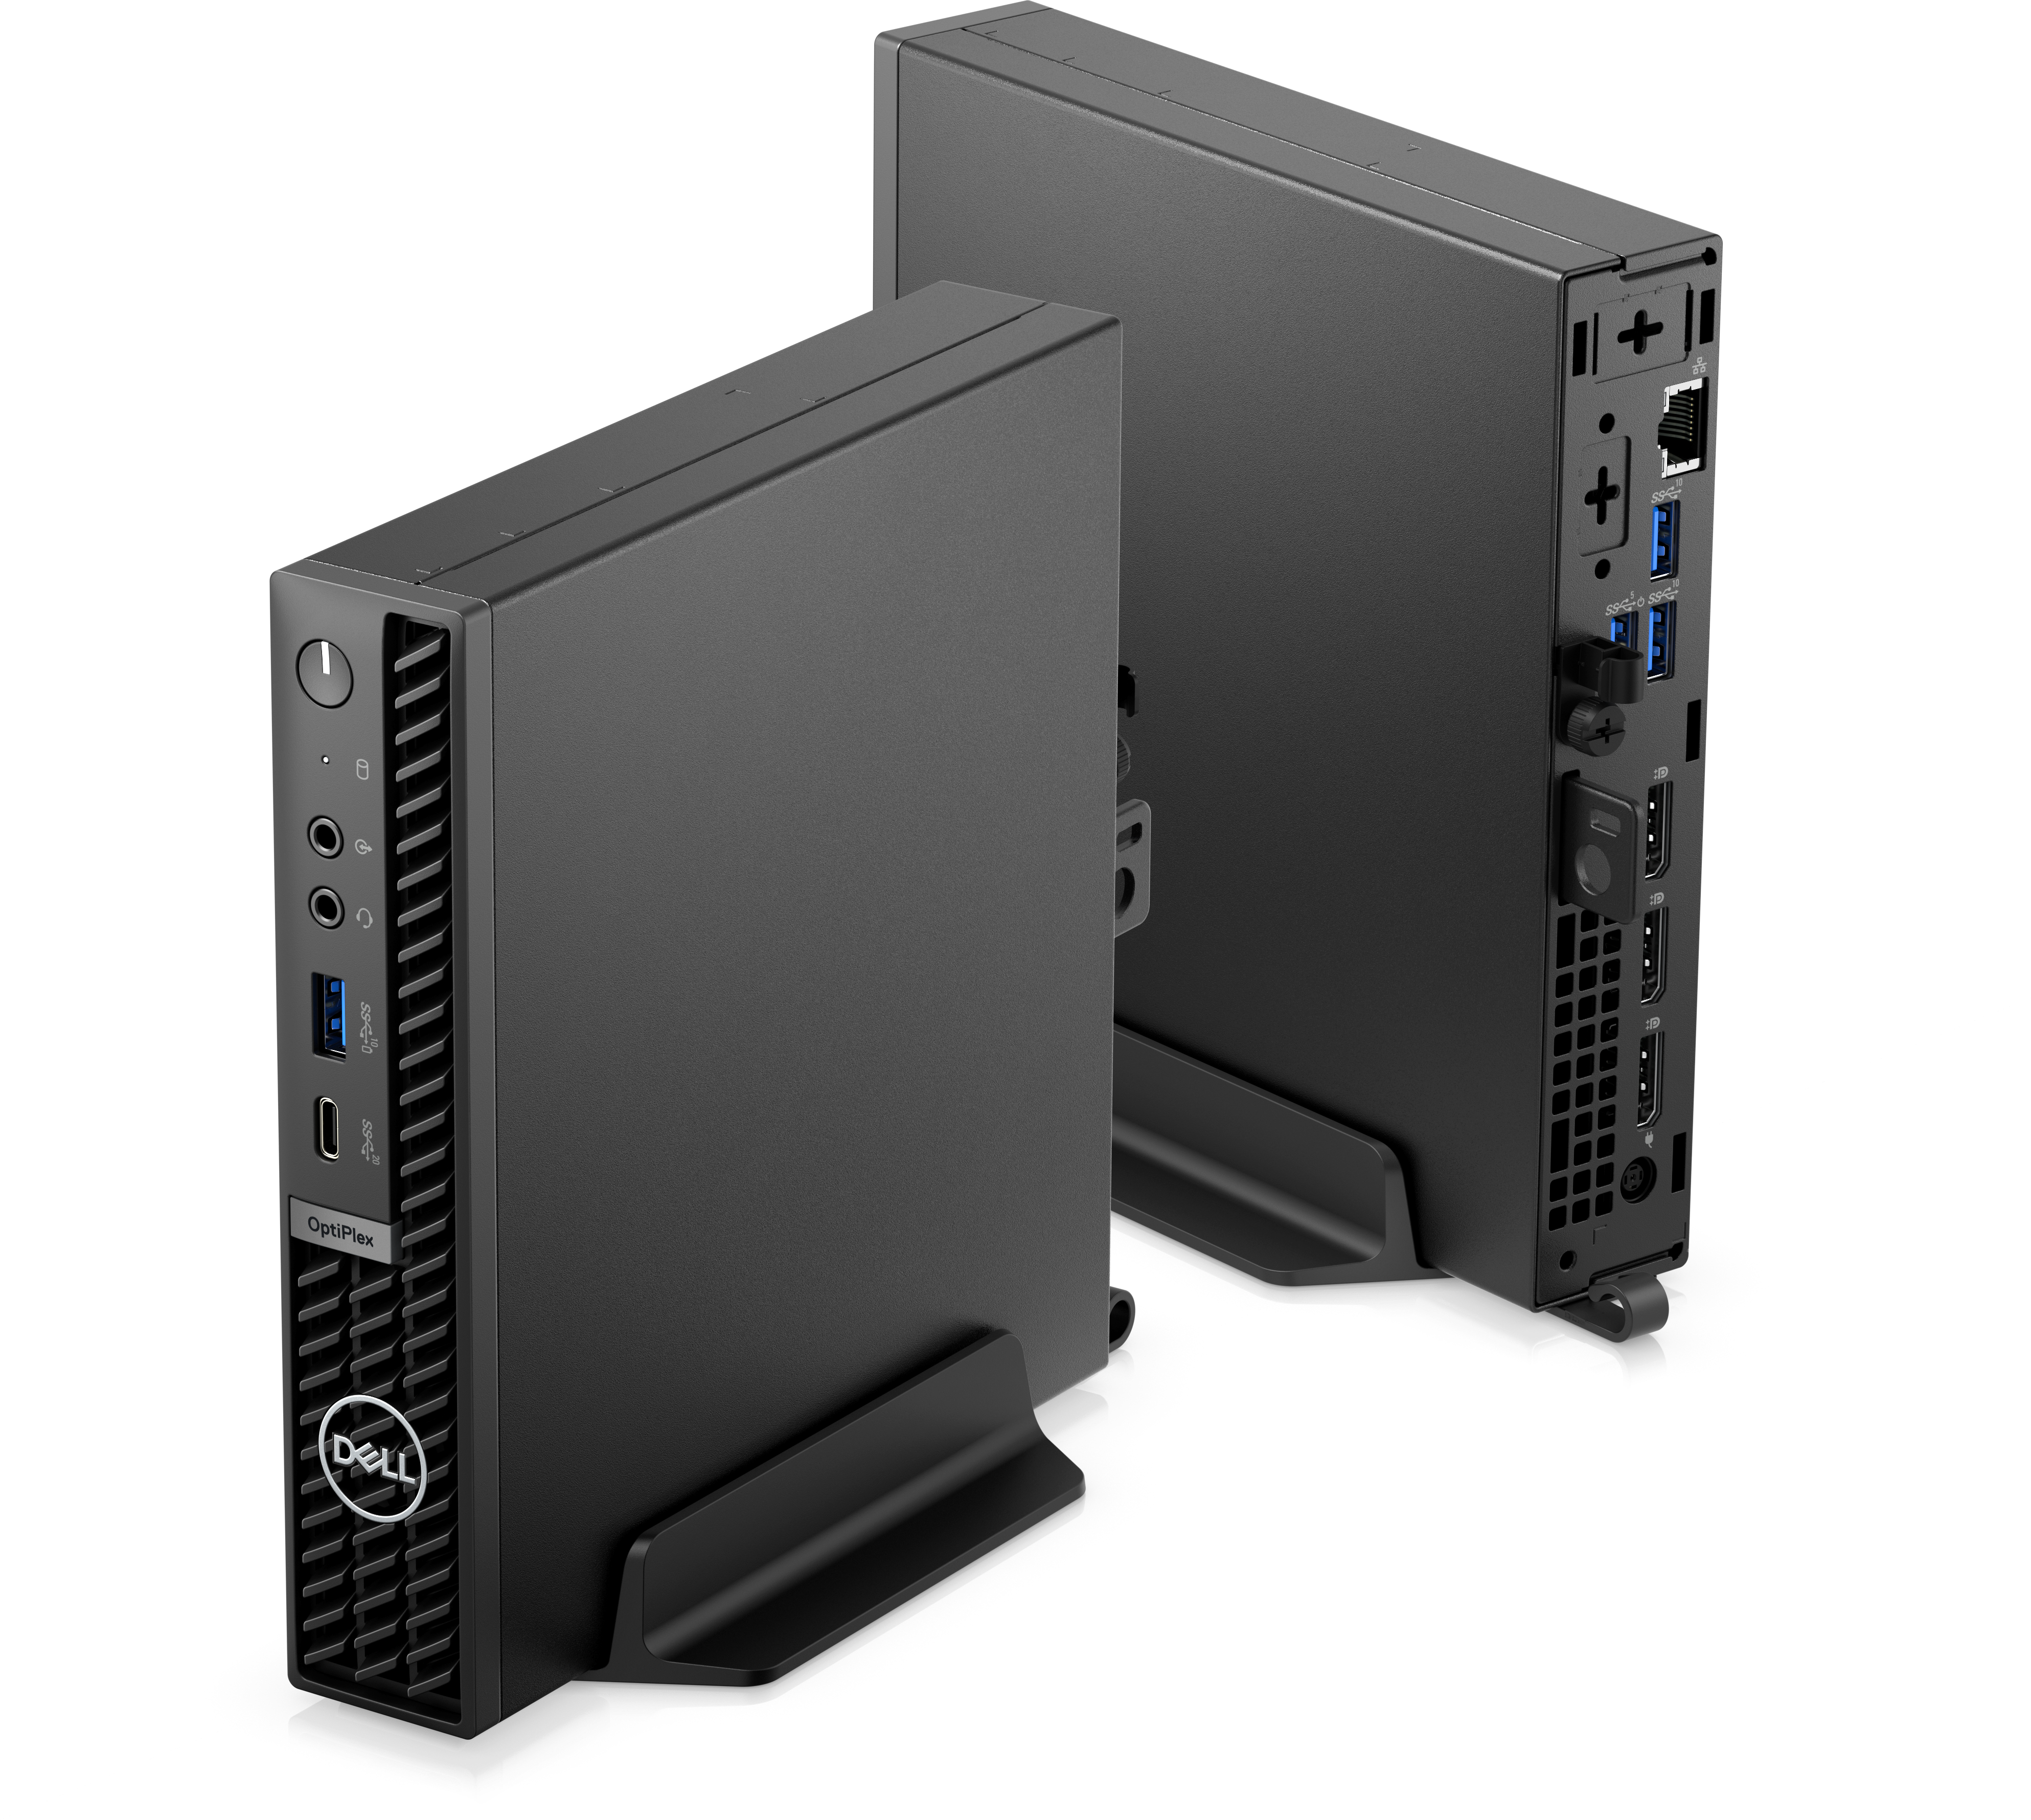 https://i.dell.com/is/image/DellContent/content/dam/images/products/desktops-and-all-in-ones/optiplex/7010-mff/op7010mff-plus-vertical-stand-xsy-shot2-bk.psd